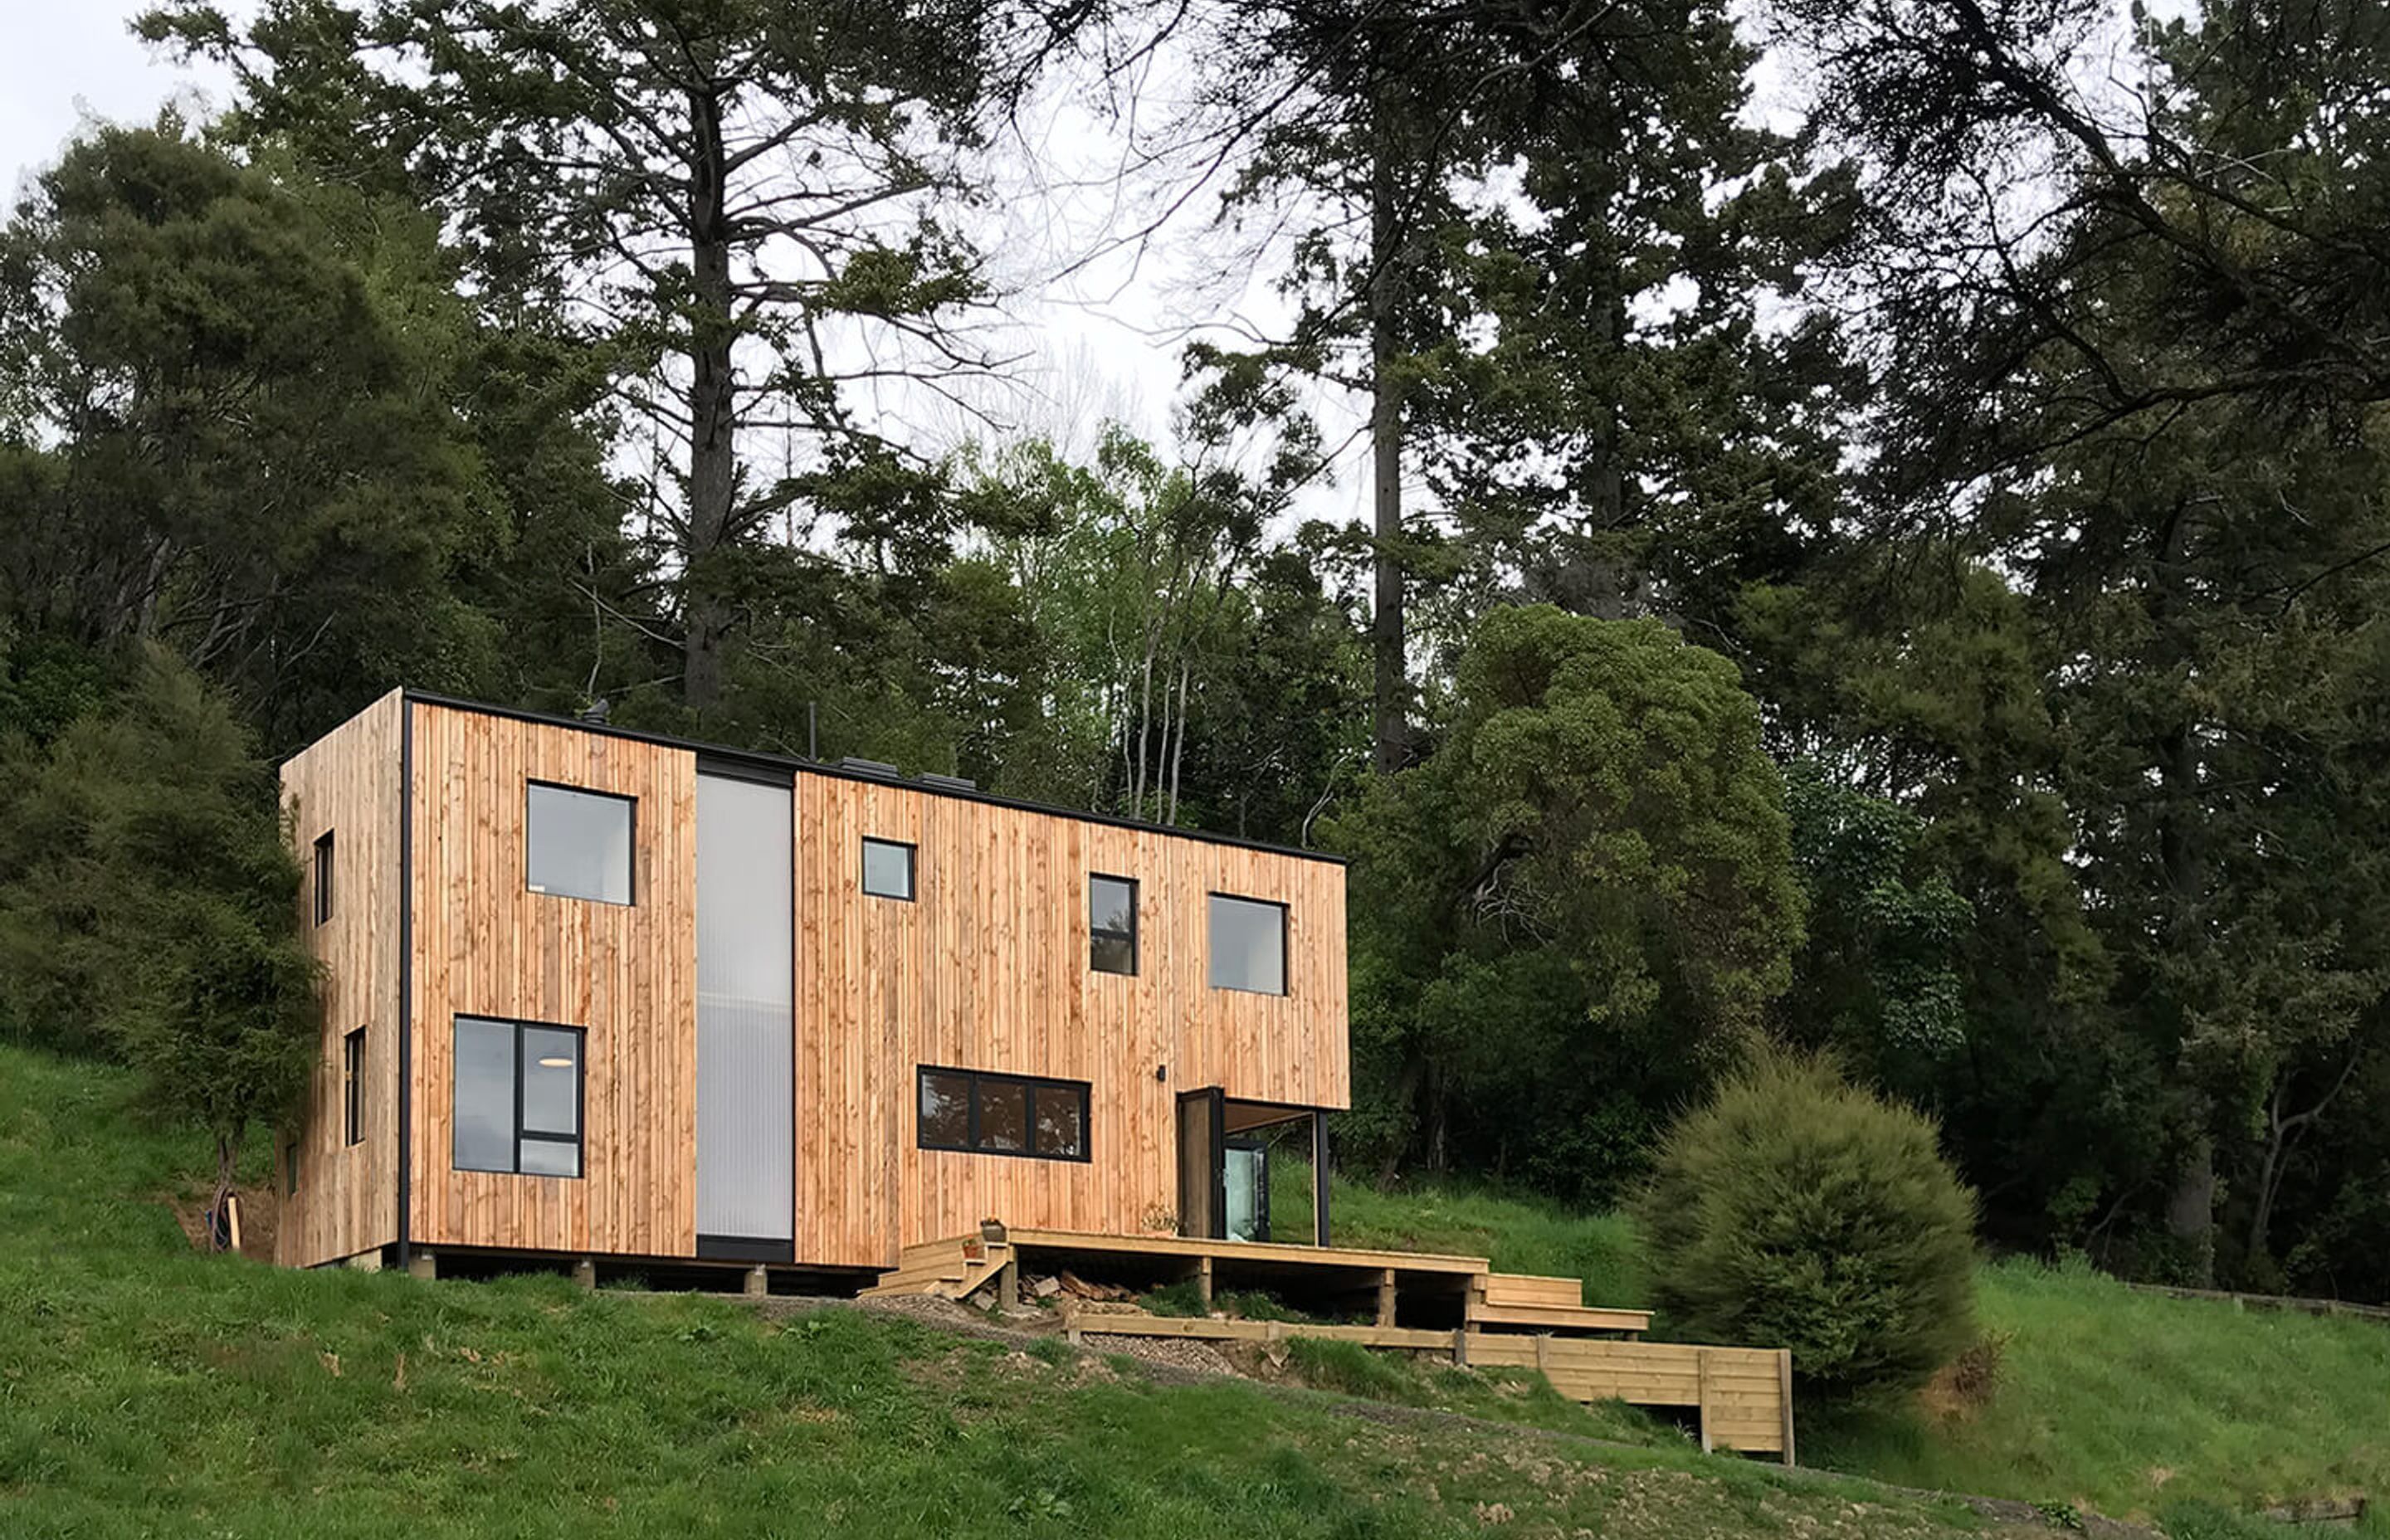 The Akaroa bach faces north over the valley and is clad in timber with a polycarbonate insert that lights up like a beacon at night and draws natural light into the interior by day.